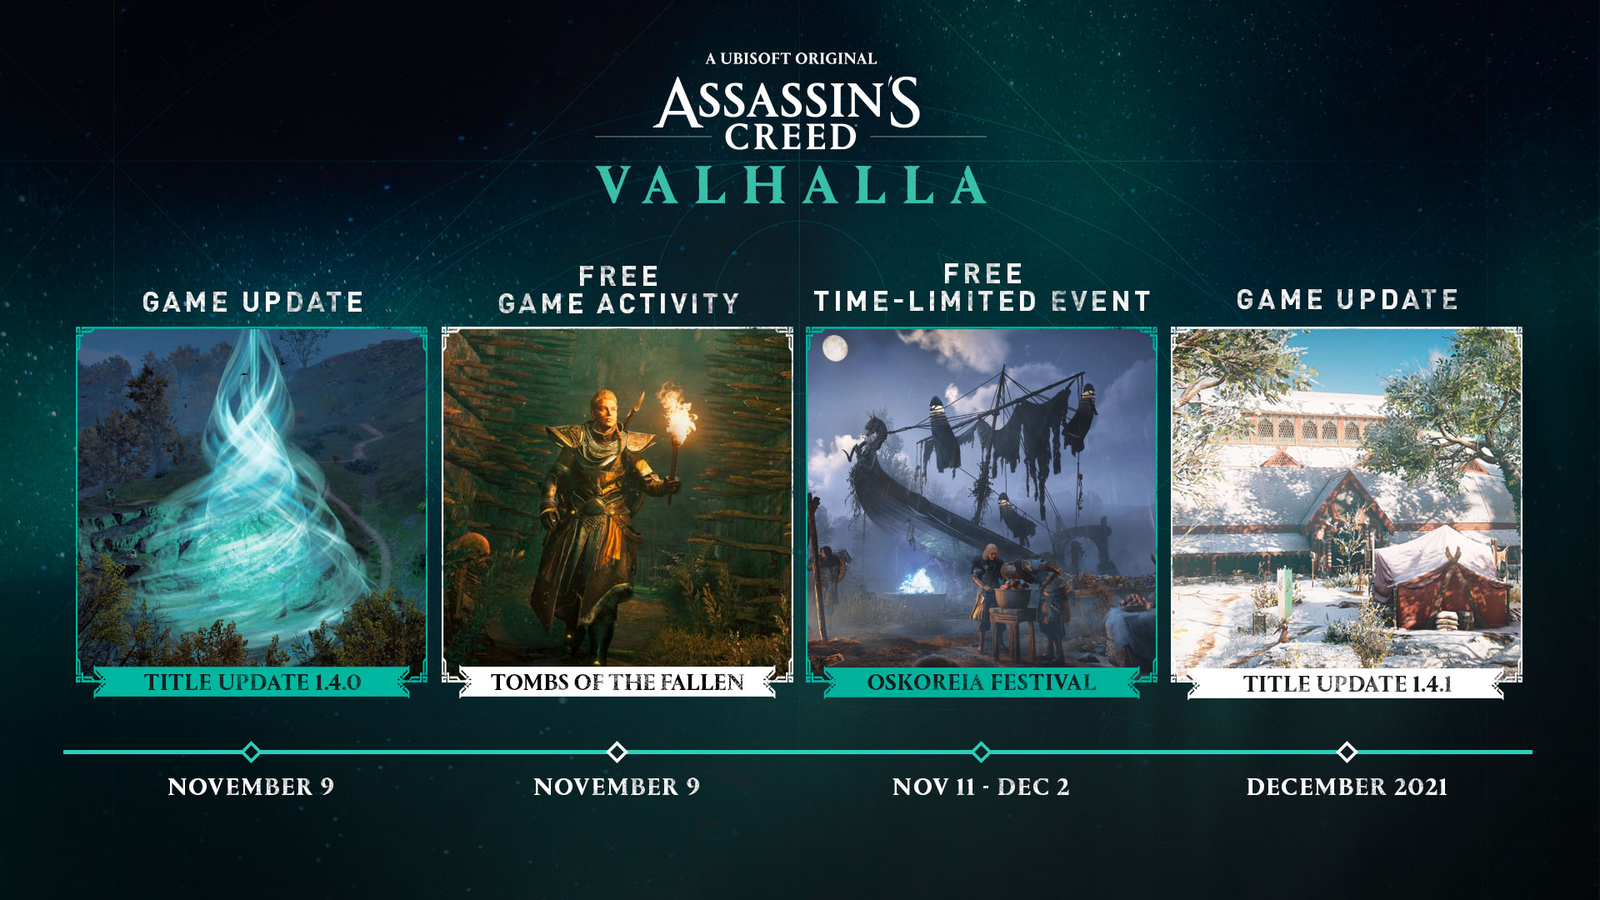 Assassin's Creed Valhalla gets new game mode in year two of post